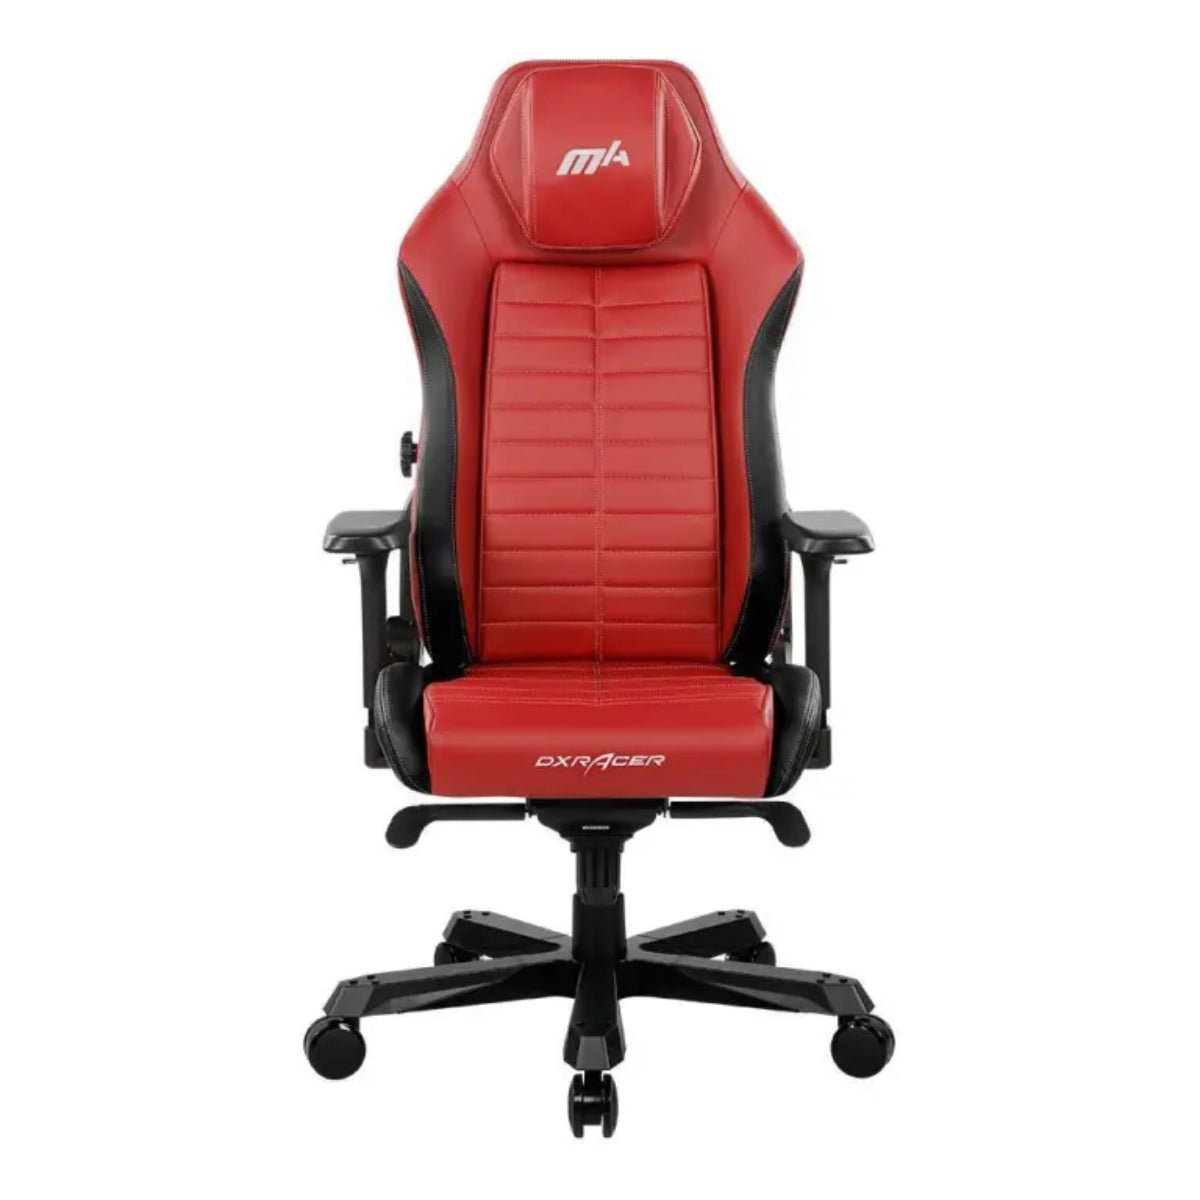 DXRacer Master Series Gaming Chair - Red & Black - Store 974 | ستور ٩٧٤